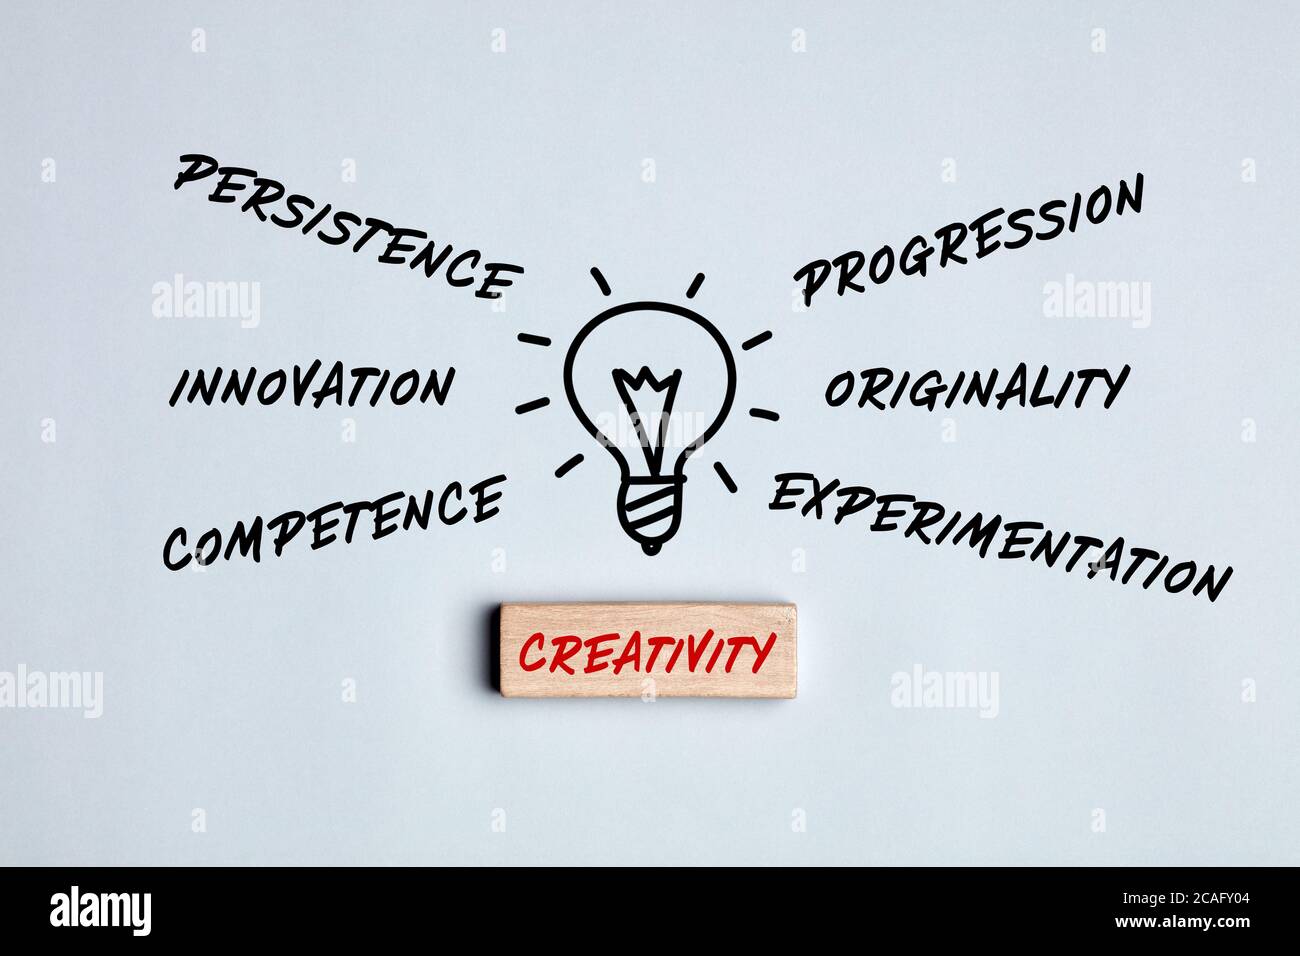 Concept of creativity or being creative. The words persistence, innovation, competence, progression, originality and experimentation as components of Stock Photo